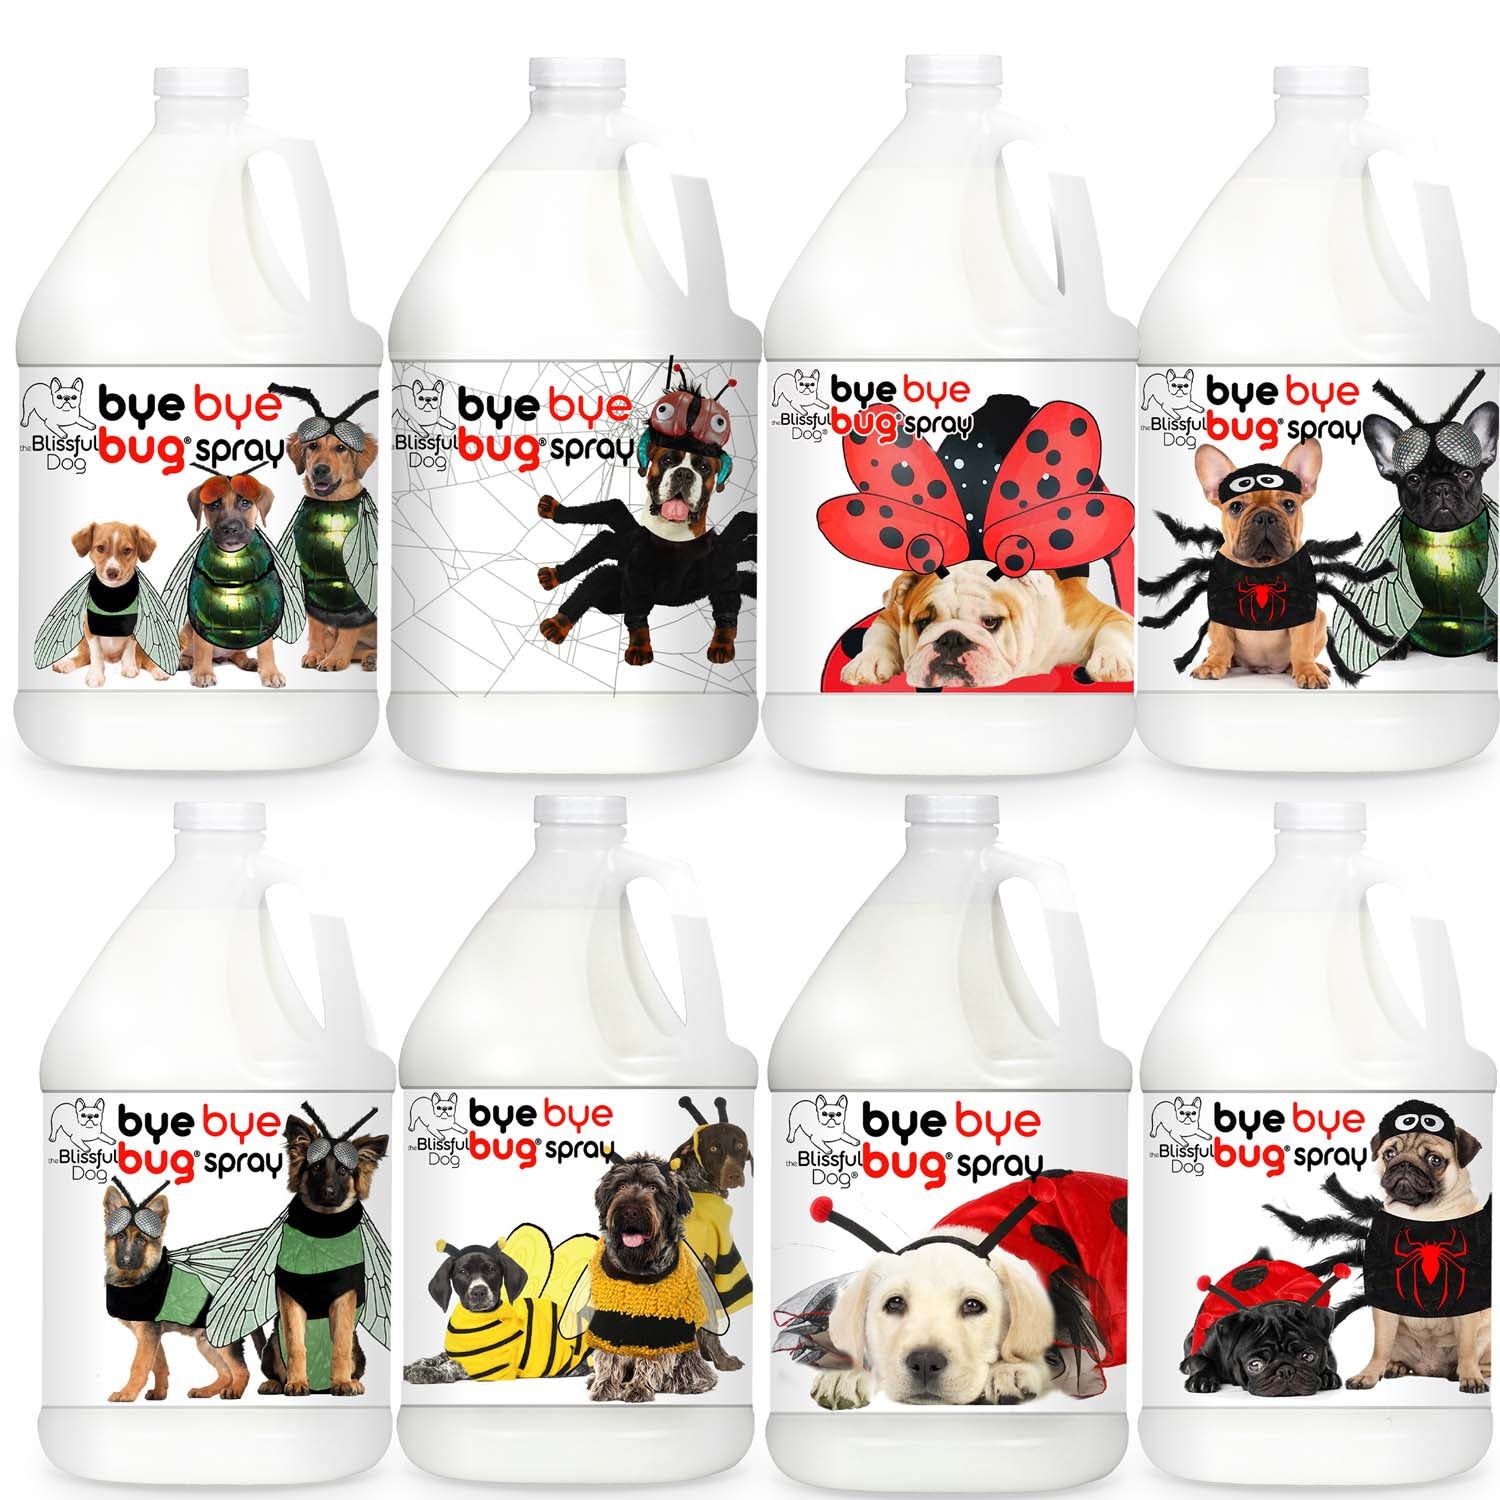 Bye Bye Boo Boo™ Natural Herbal Dog Spray for Itchy Dogs